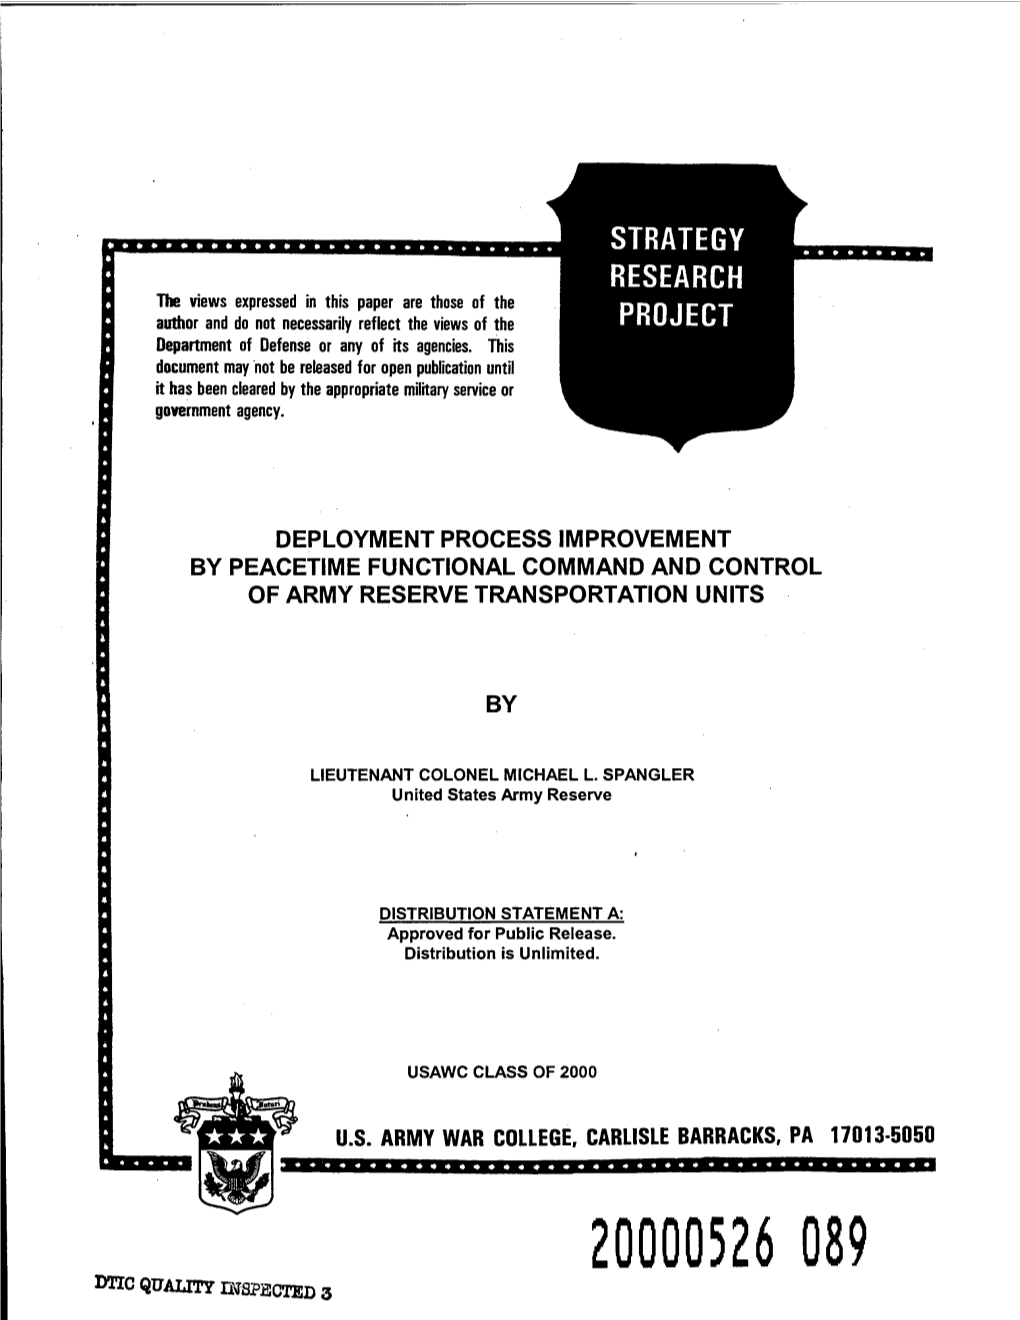 Deployment Process Improvement by Peacetime Functional Command and Control of Army Reserve Transportation Units